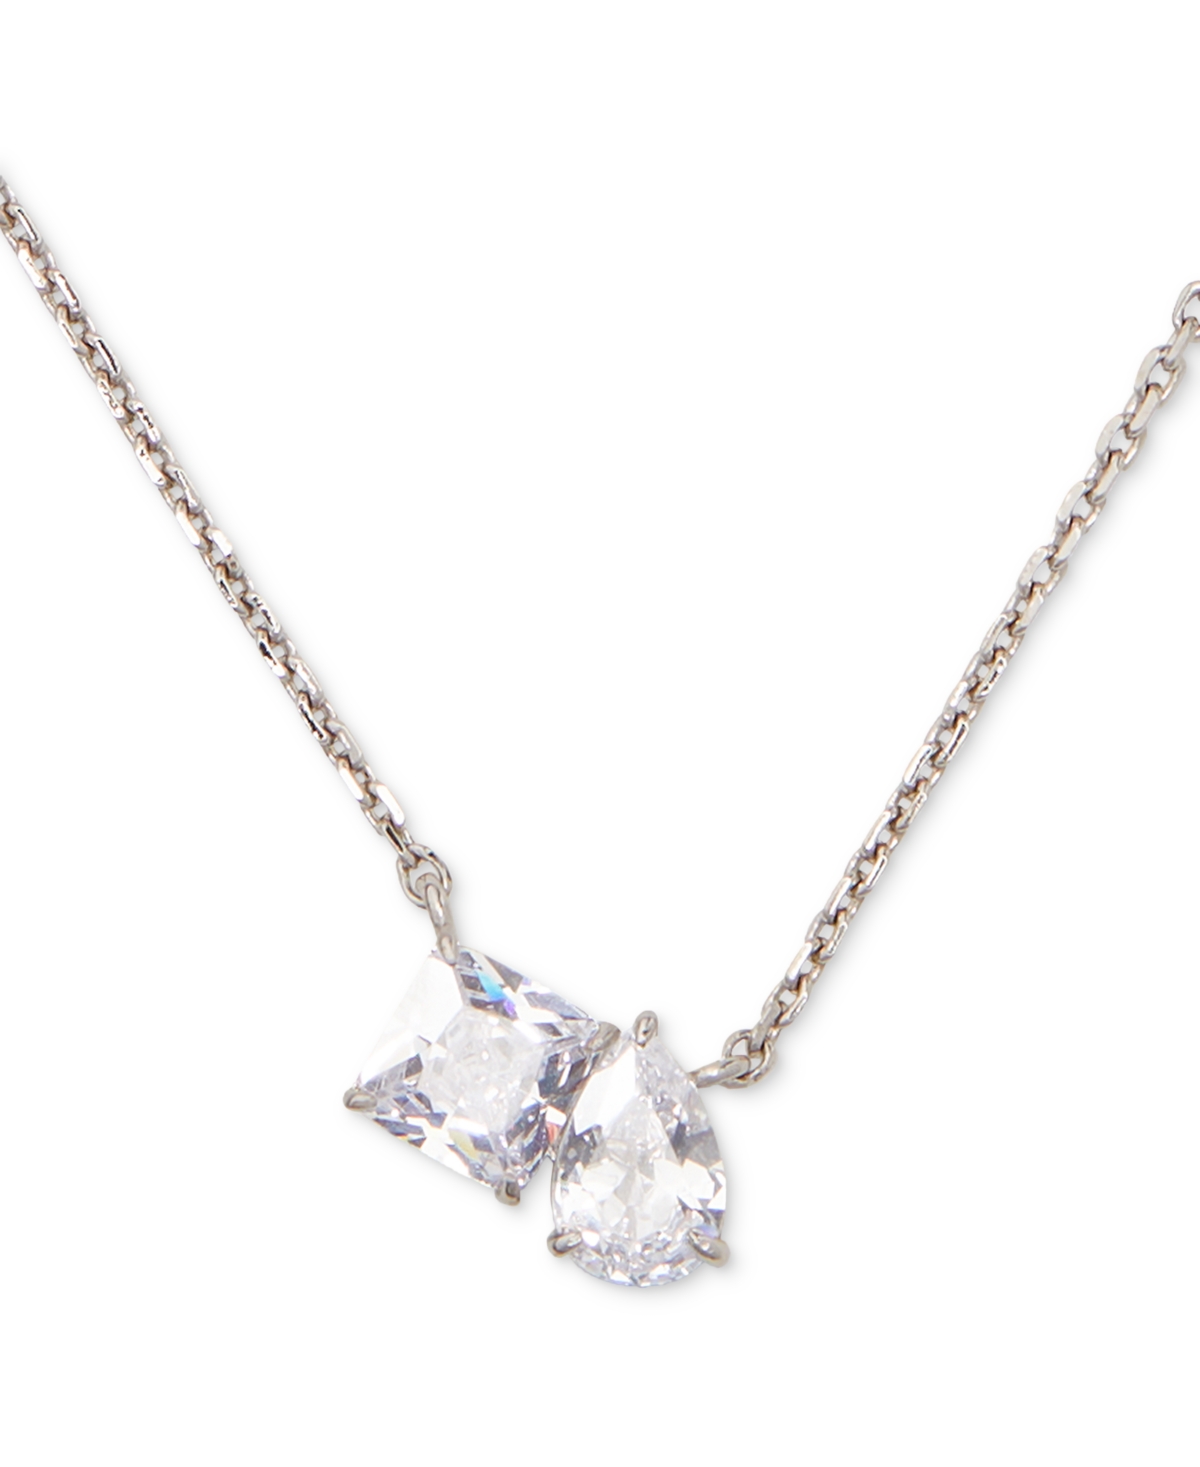 Kate Spade Double Crystal Pendant Necklace, 16" + 3" Extender In Clear,silver.